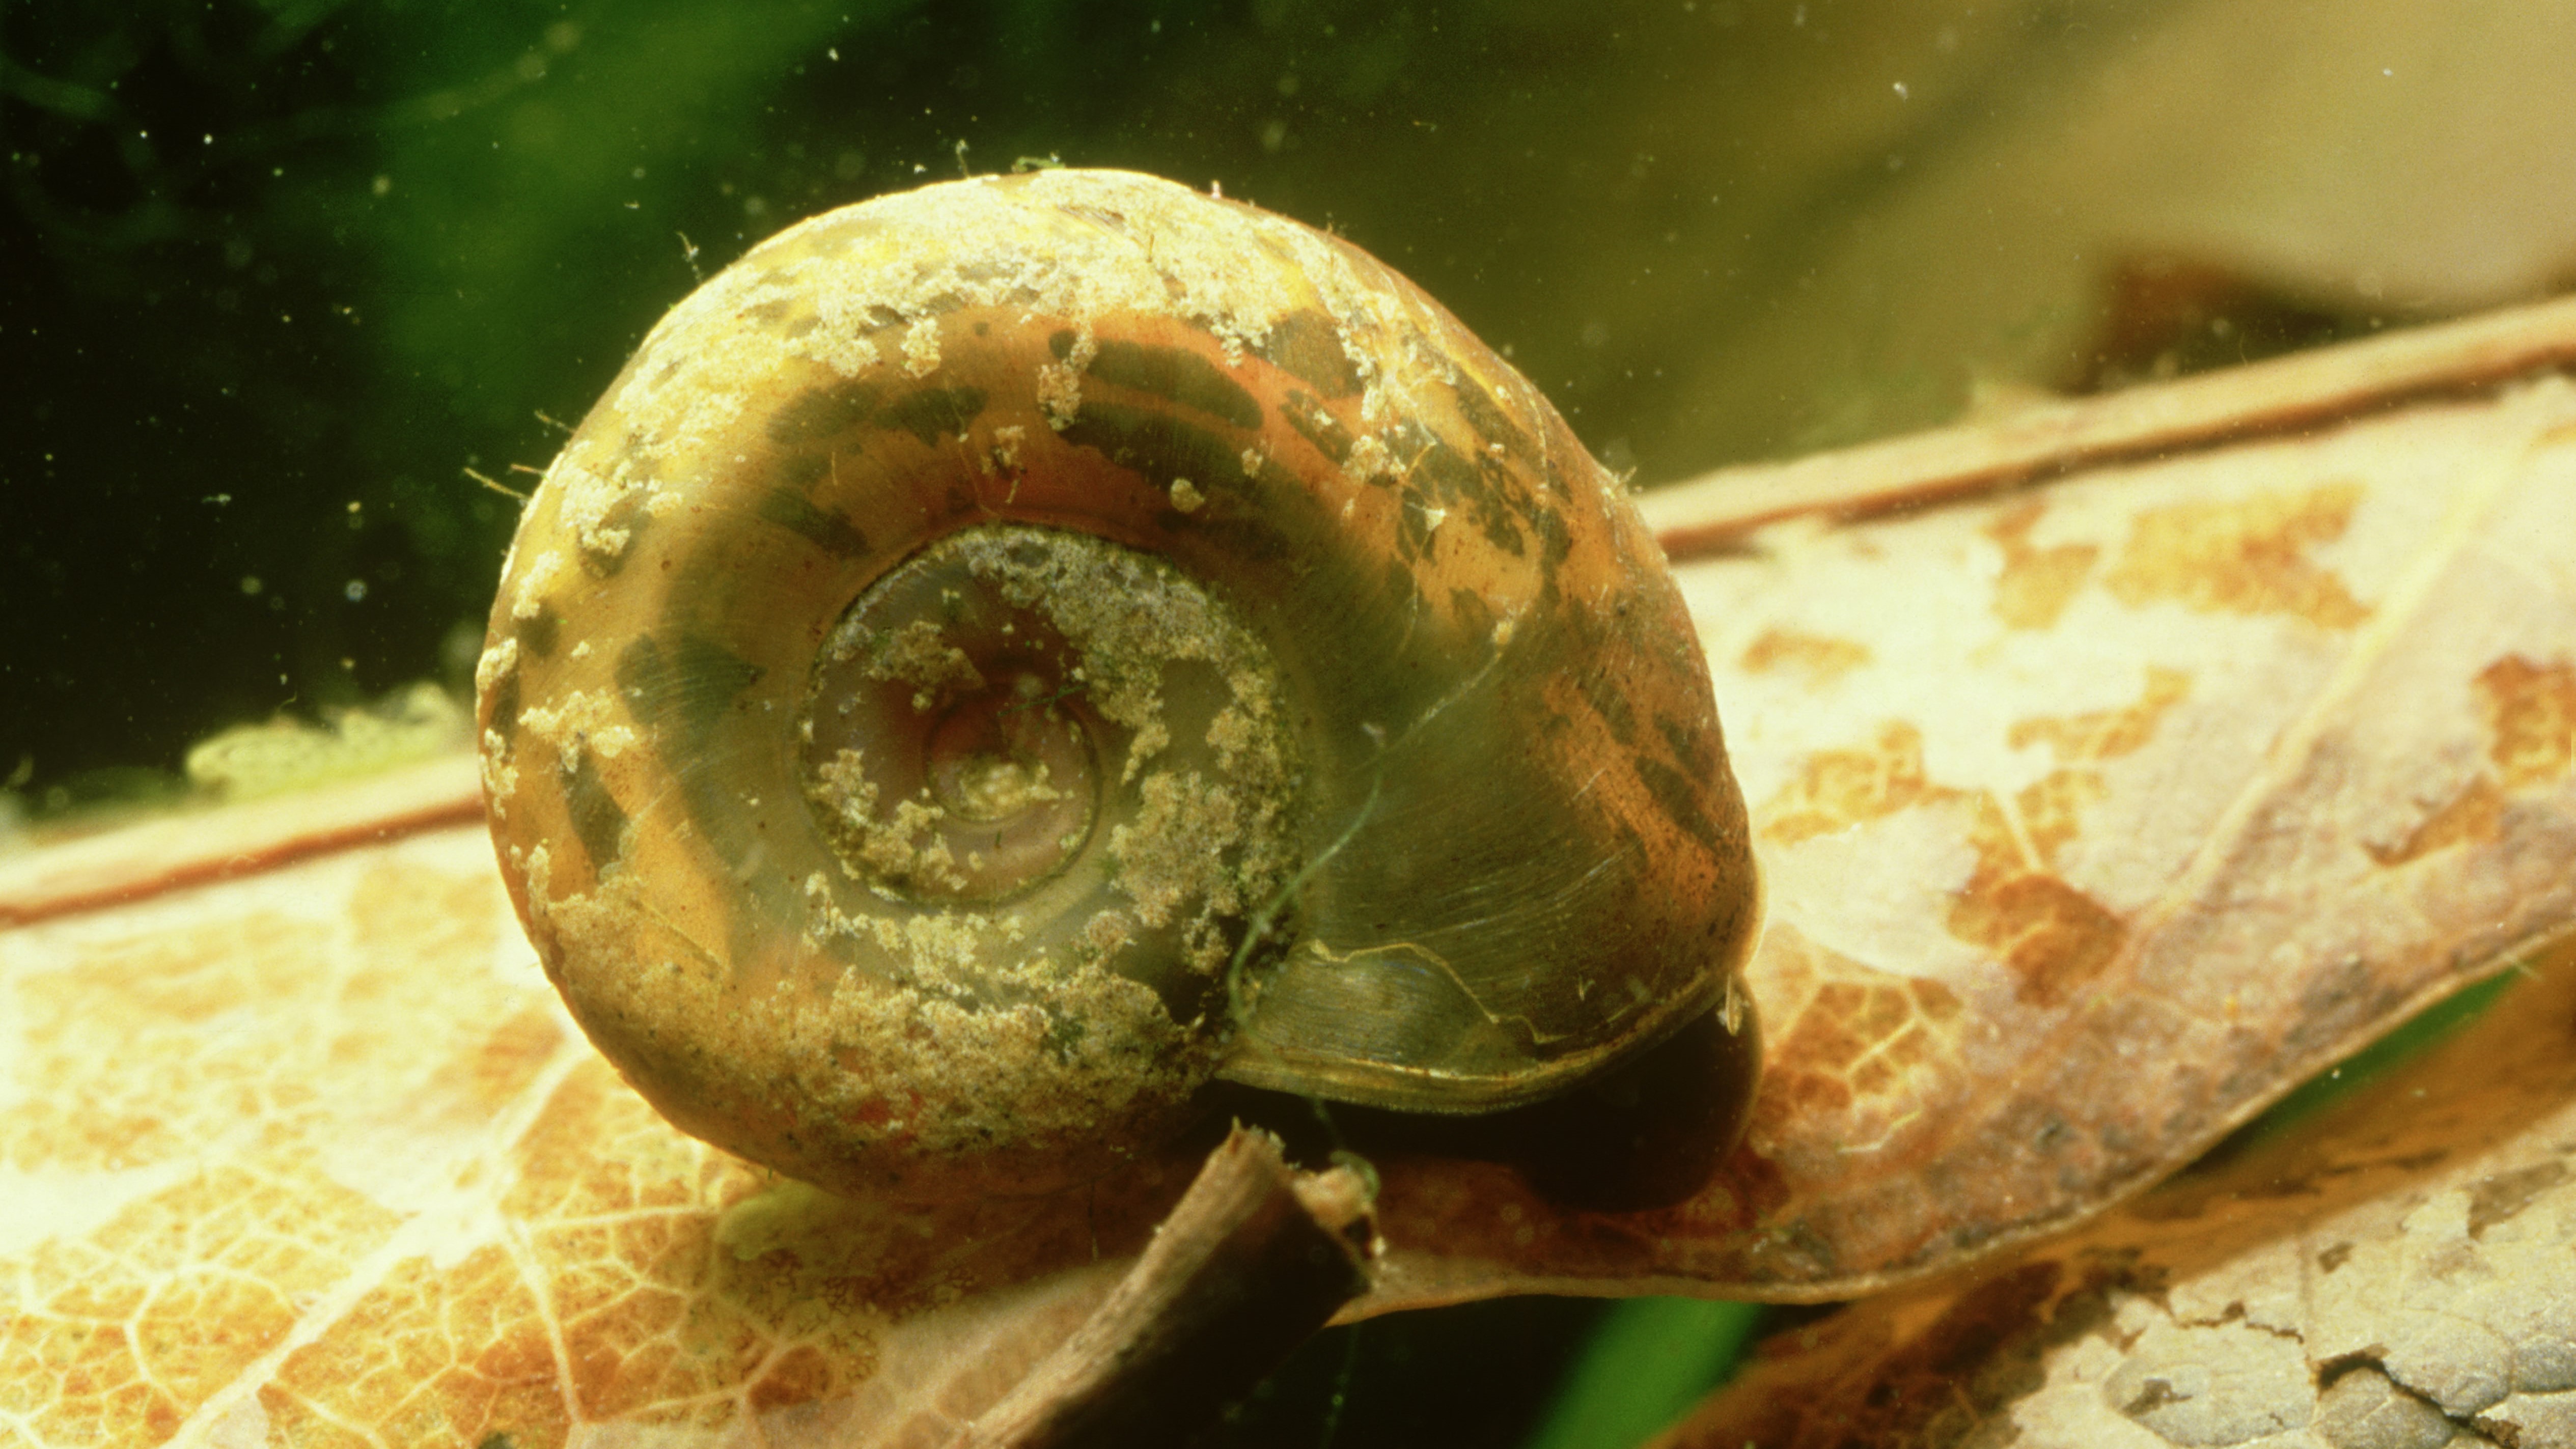 Biomphalaria pfeifferi, a freshwater snail that can carry a parasite deadly to humans, underwater on a leaf